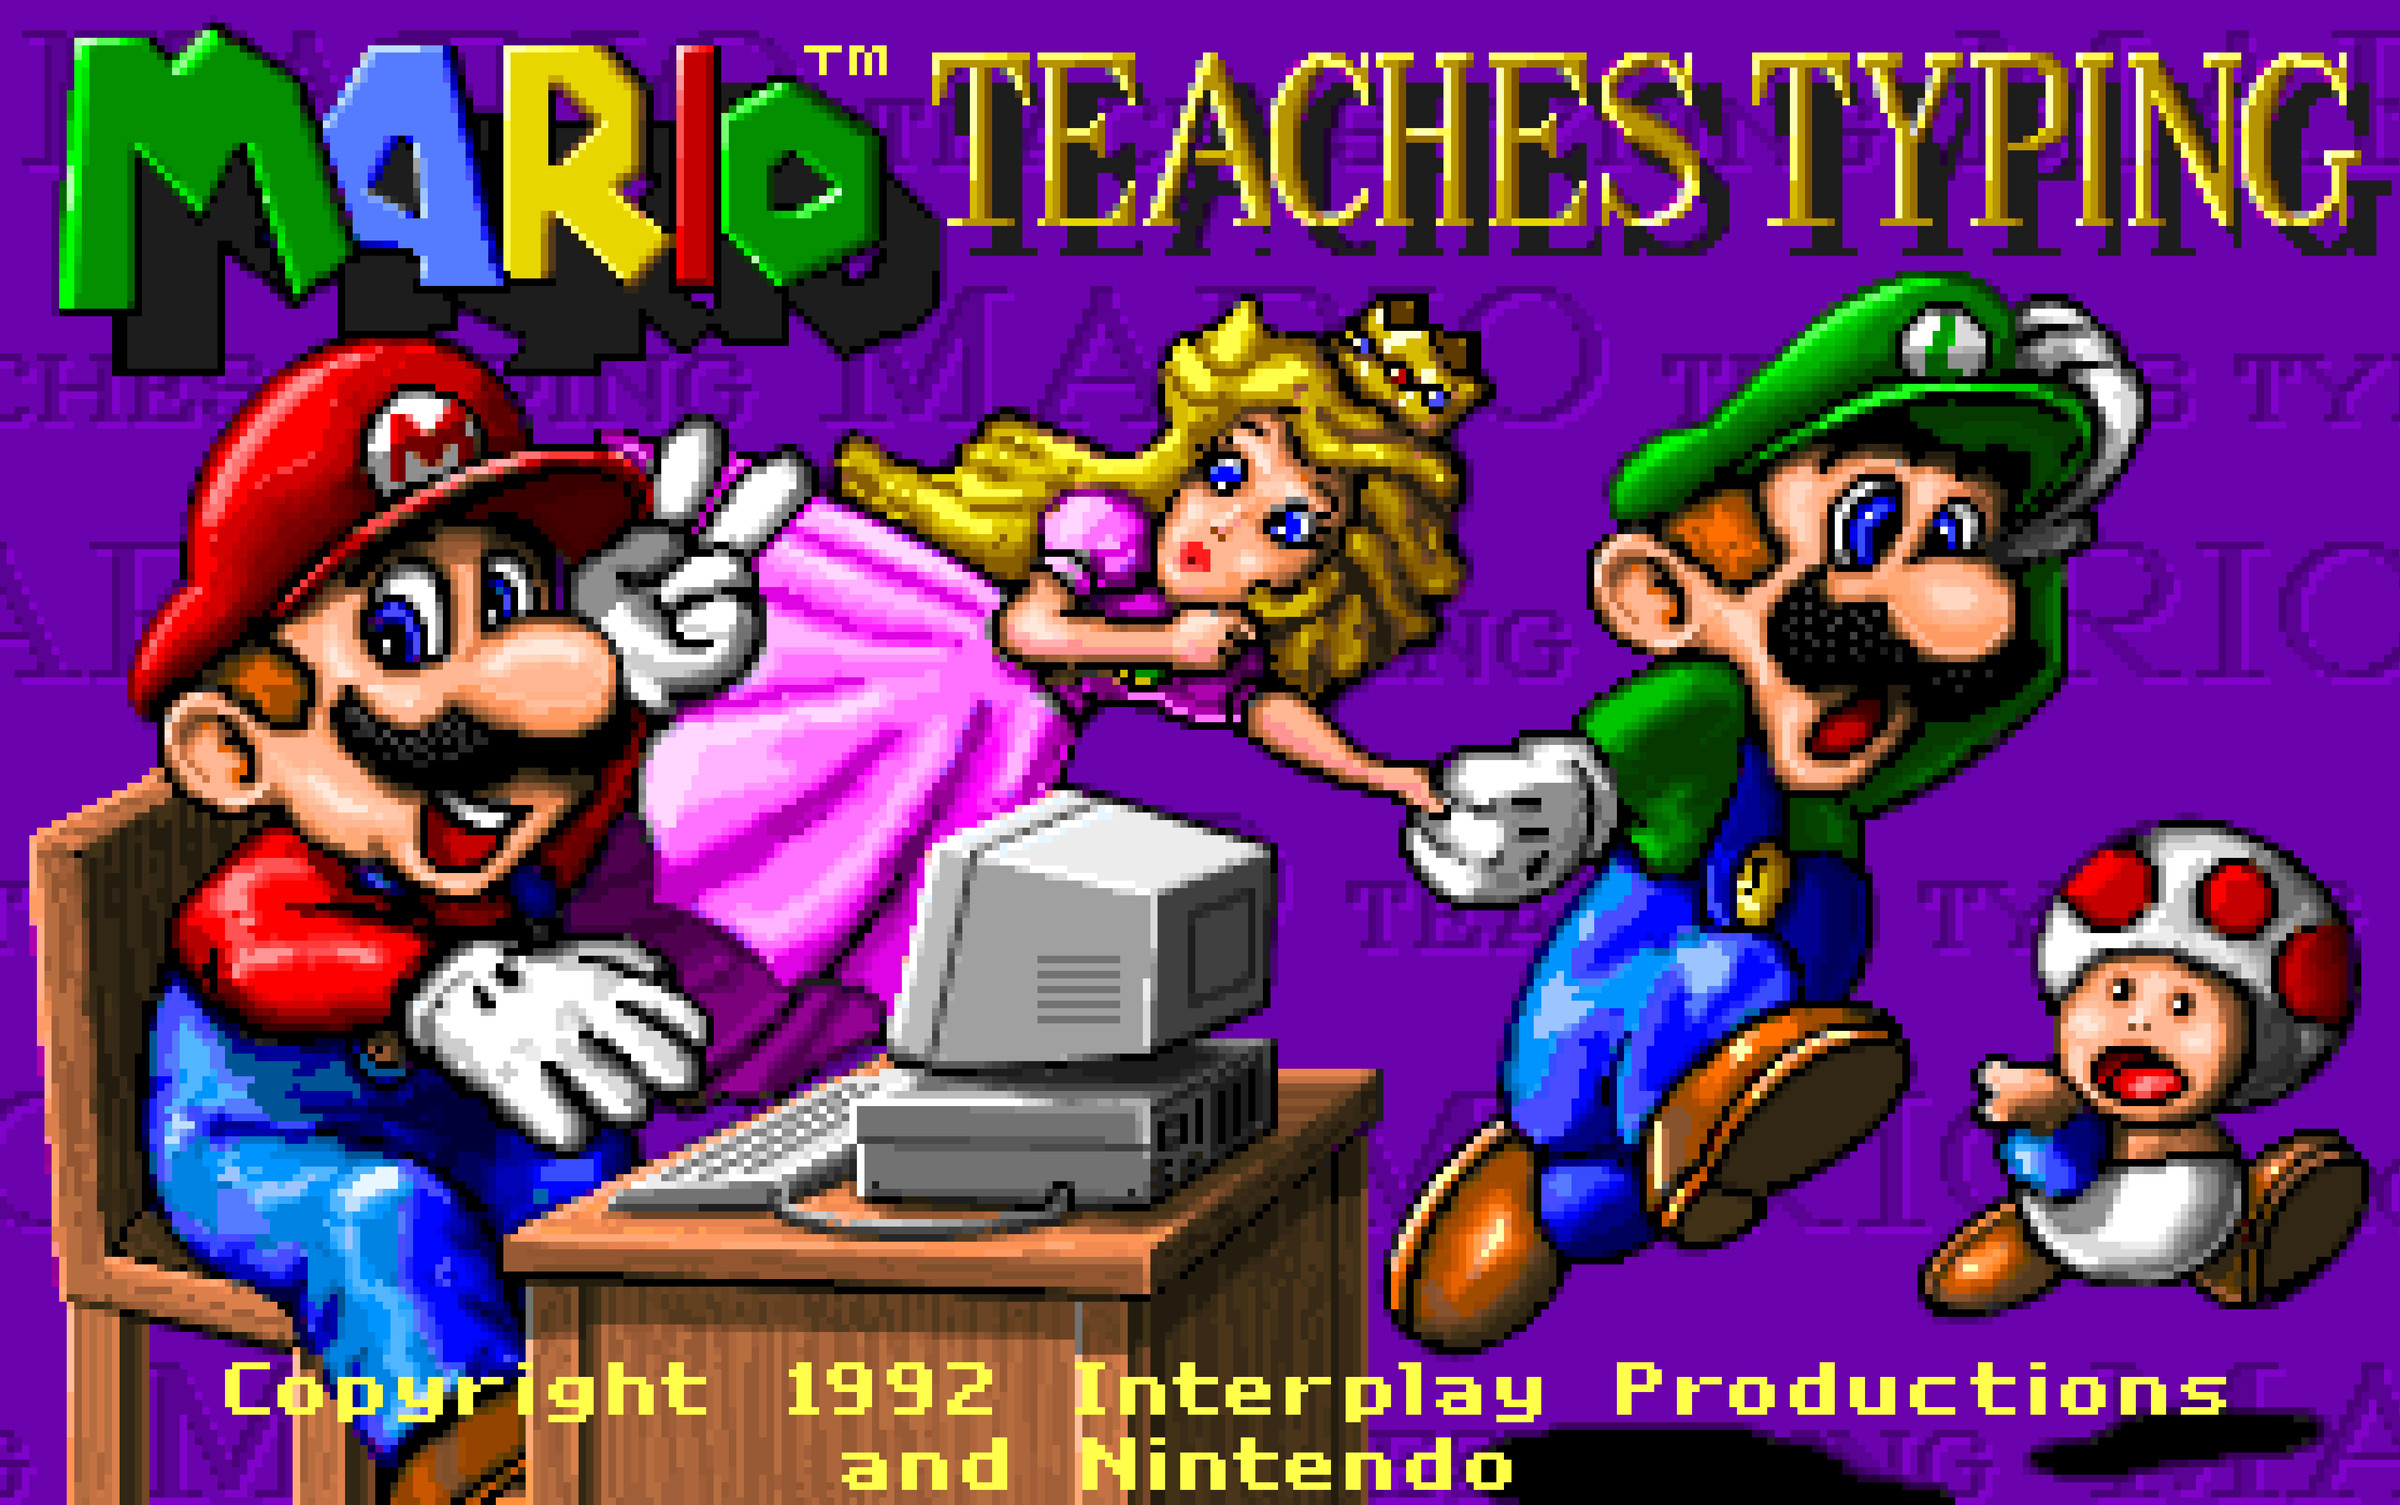 Mamma mia! What the hell is going on with Toad’s face in this title screen?